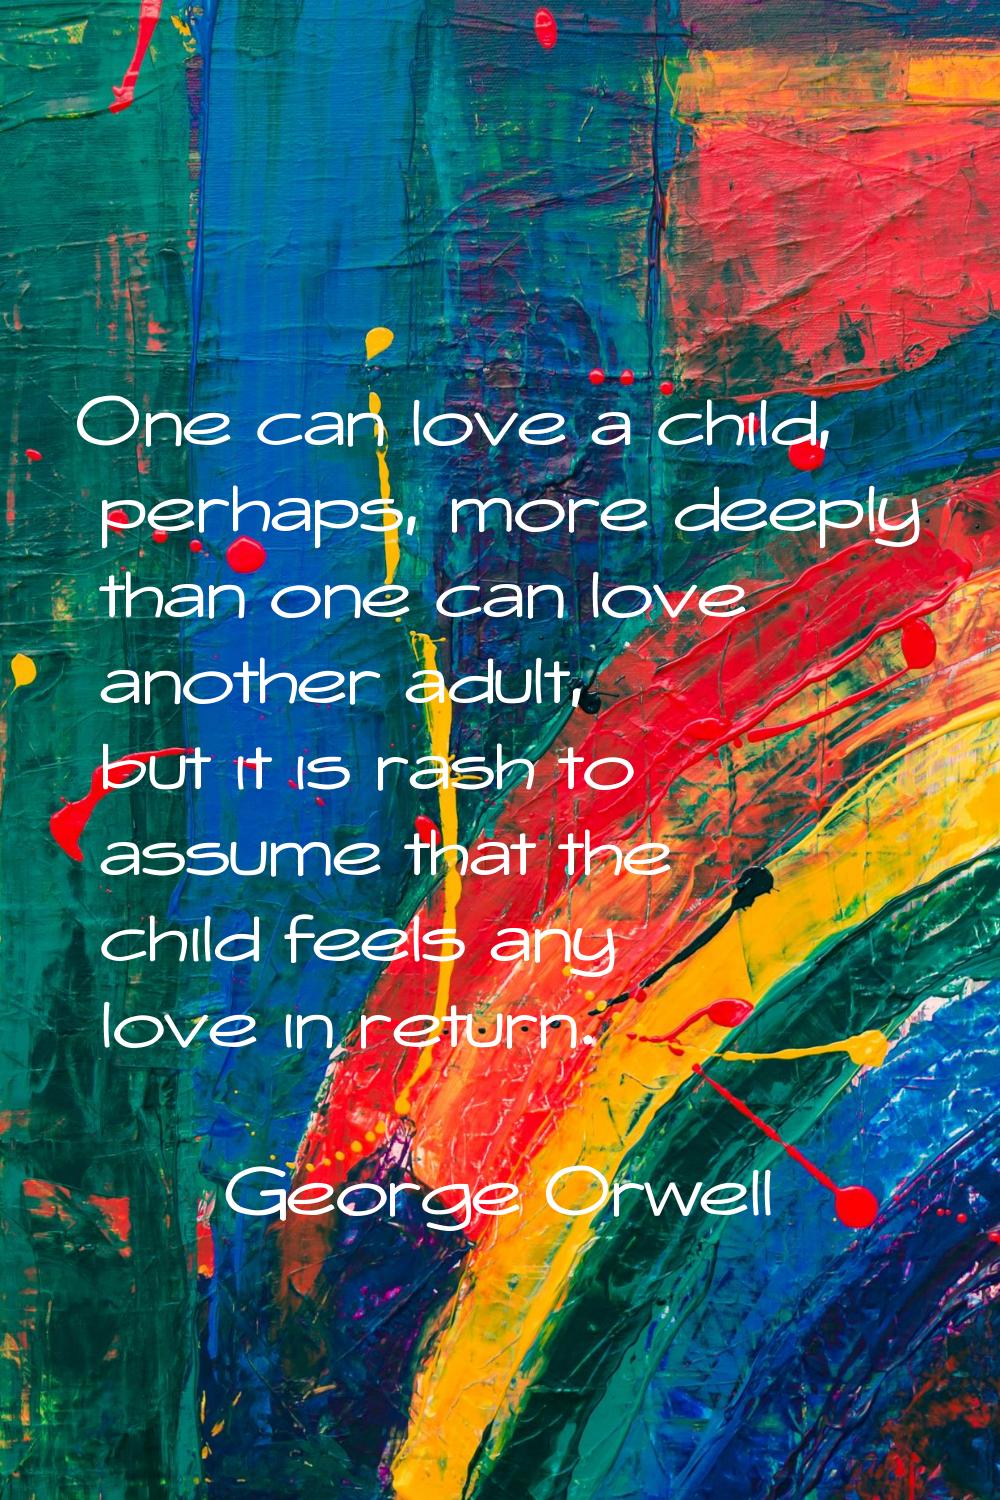 One can love a child, perhaps, more deeply than one can love another adult, but it is rash to assum